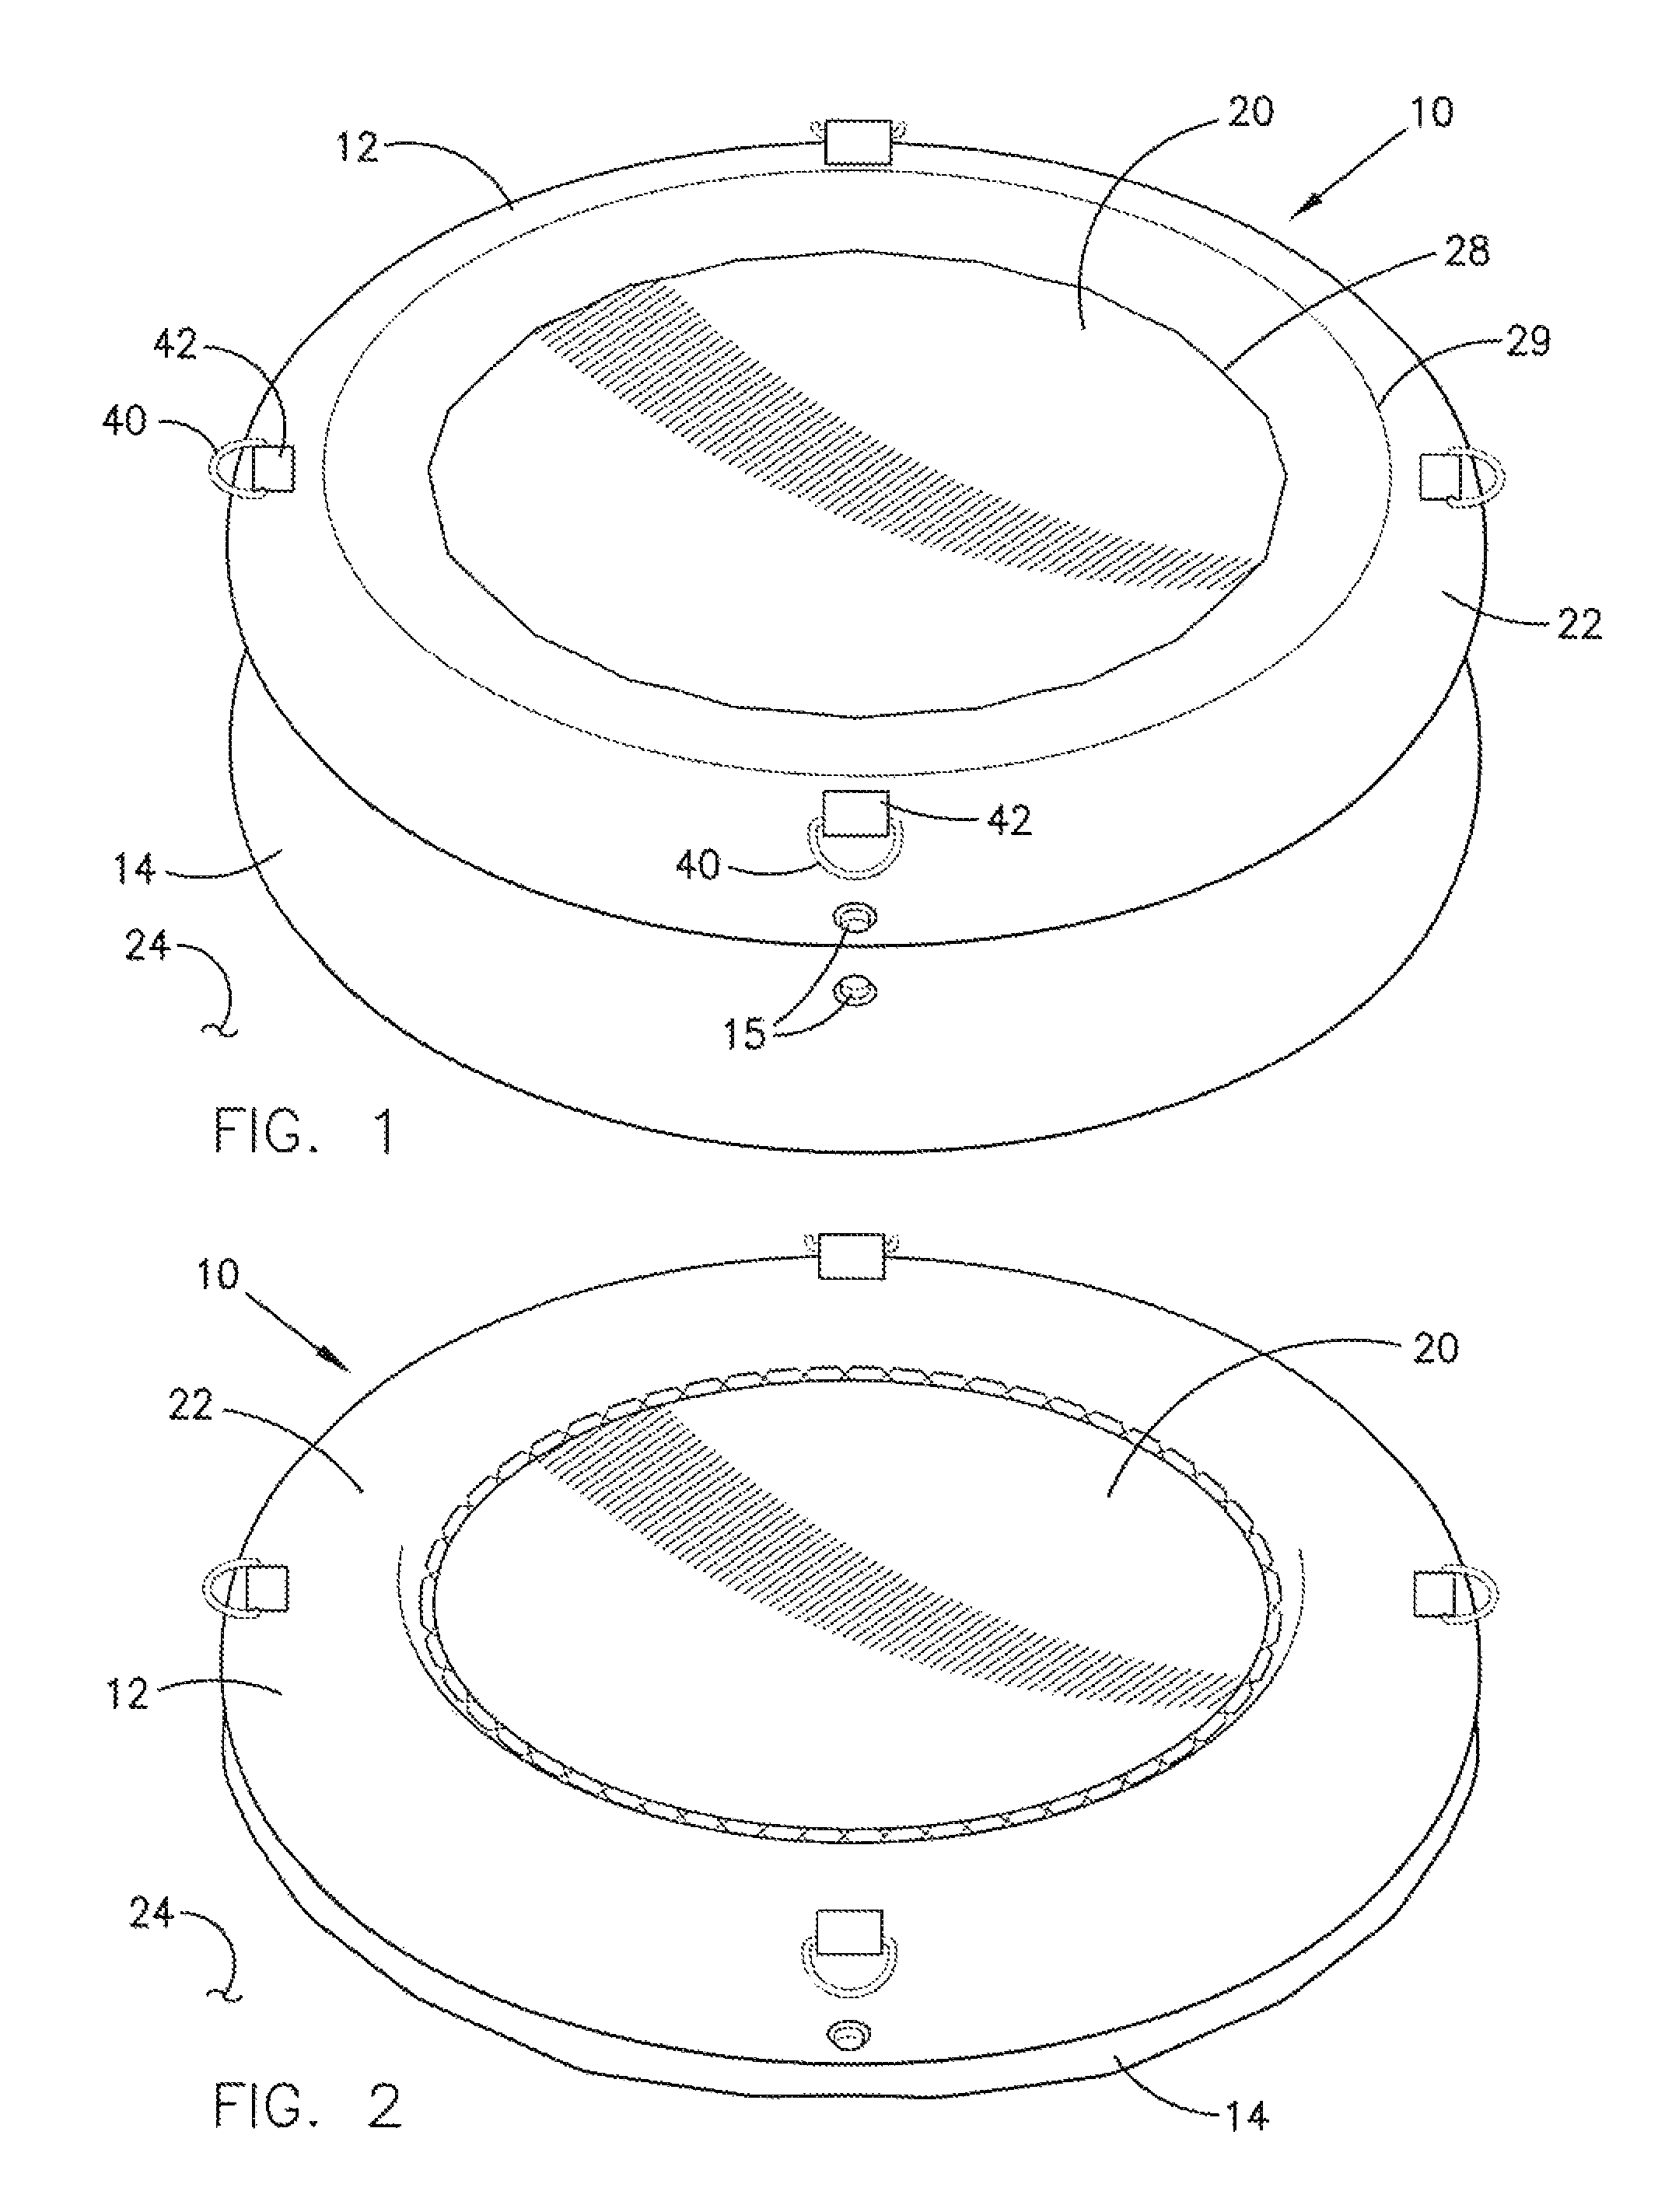 Inflatable recreation device